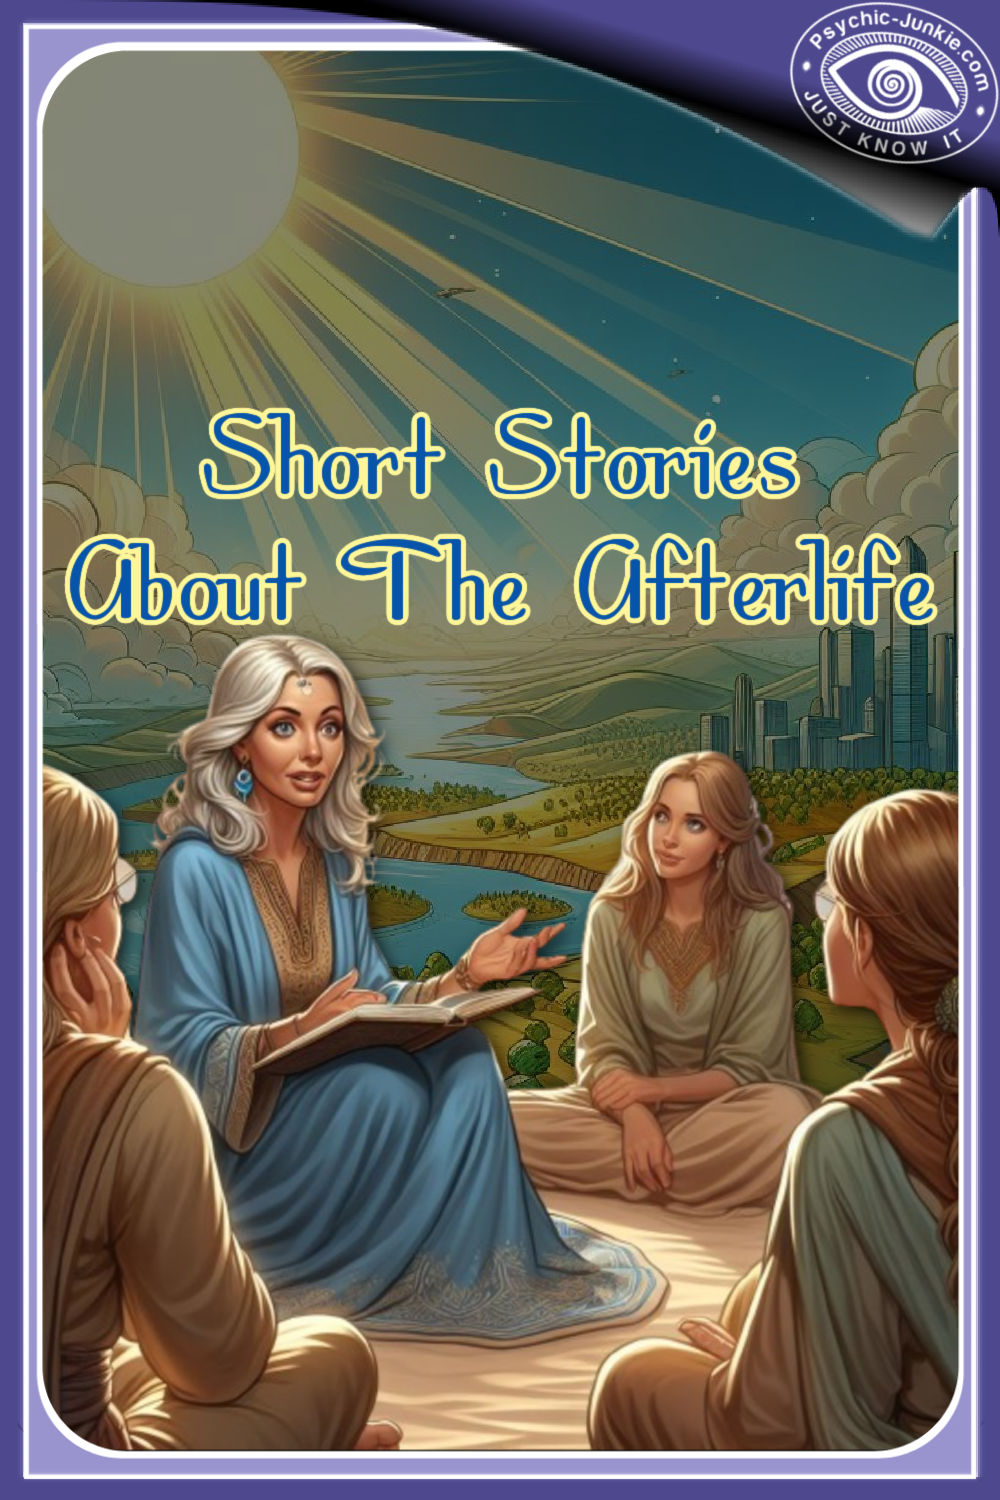 Short Stories About The Afterlife